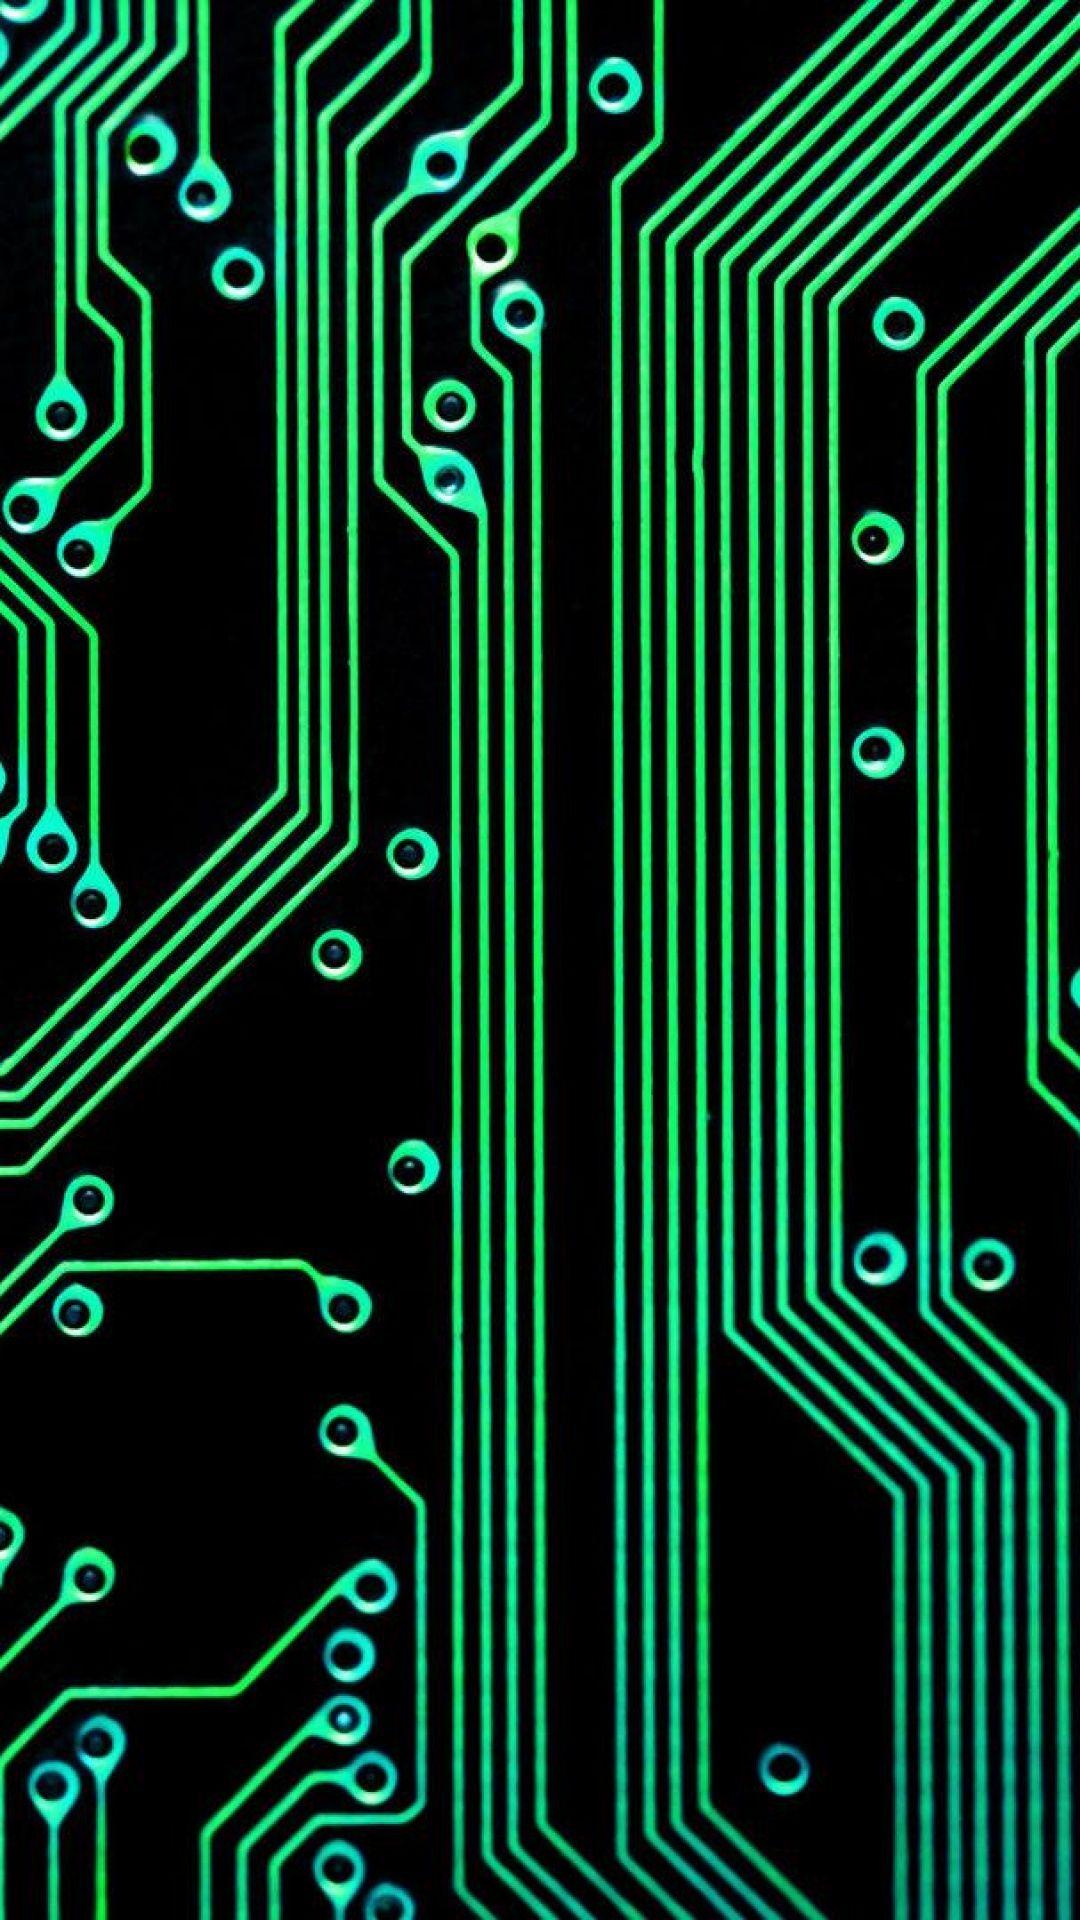 Electronic Circuit Green Black Android Wallpaper free download